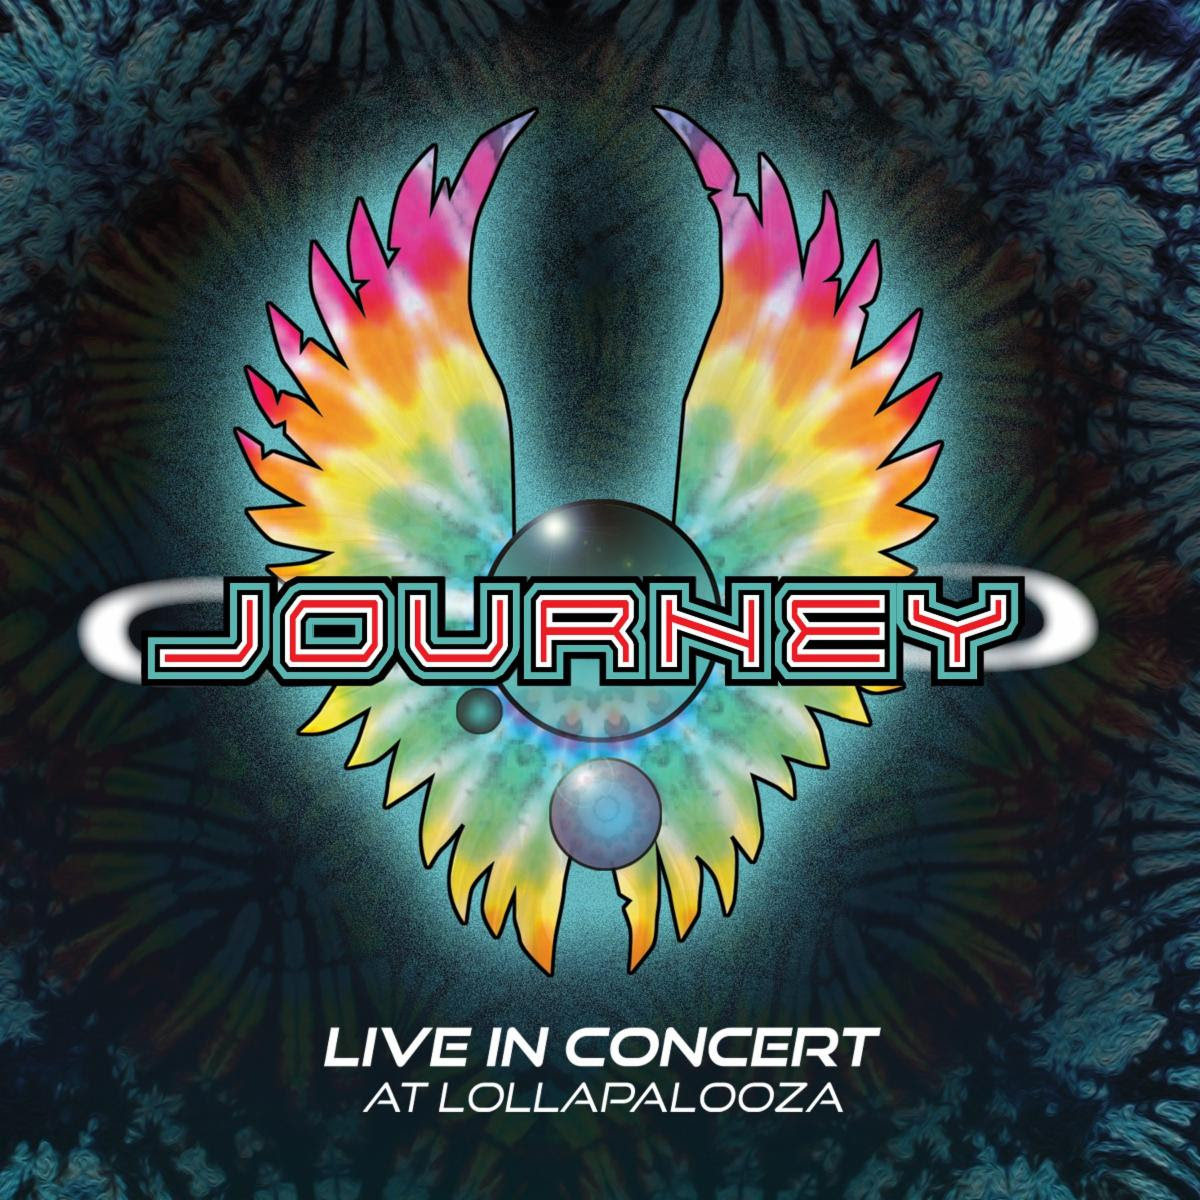 JOURNEY ANNOUNCES NEW LIVE RELEASE 'LIVE IN CONCERT AT LOLLAPALOOZA'